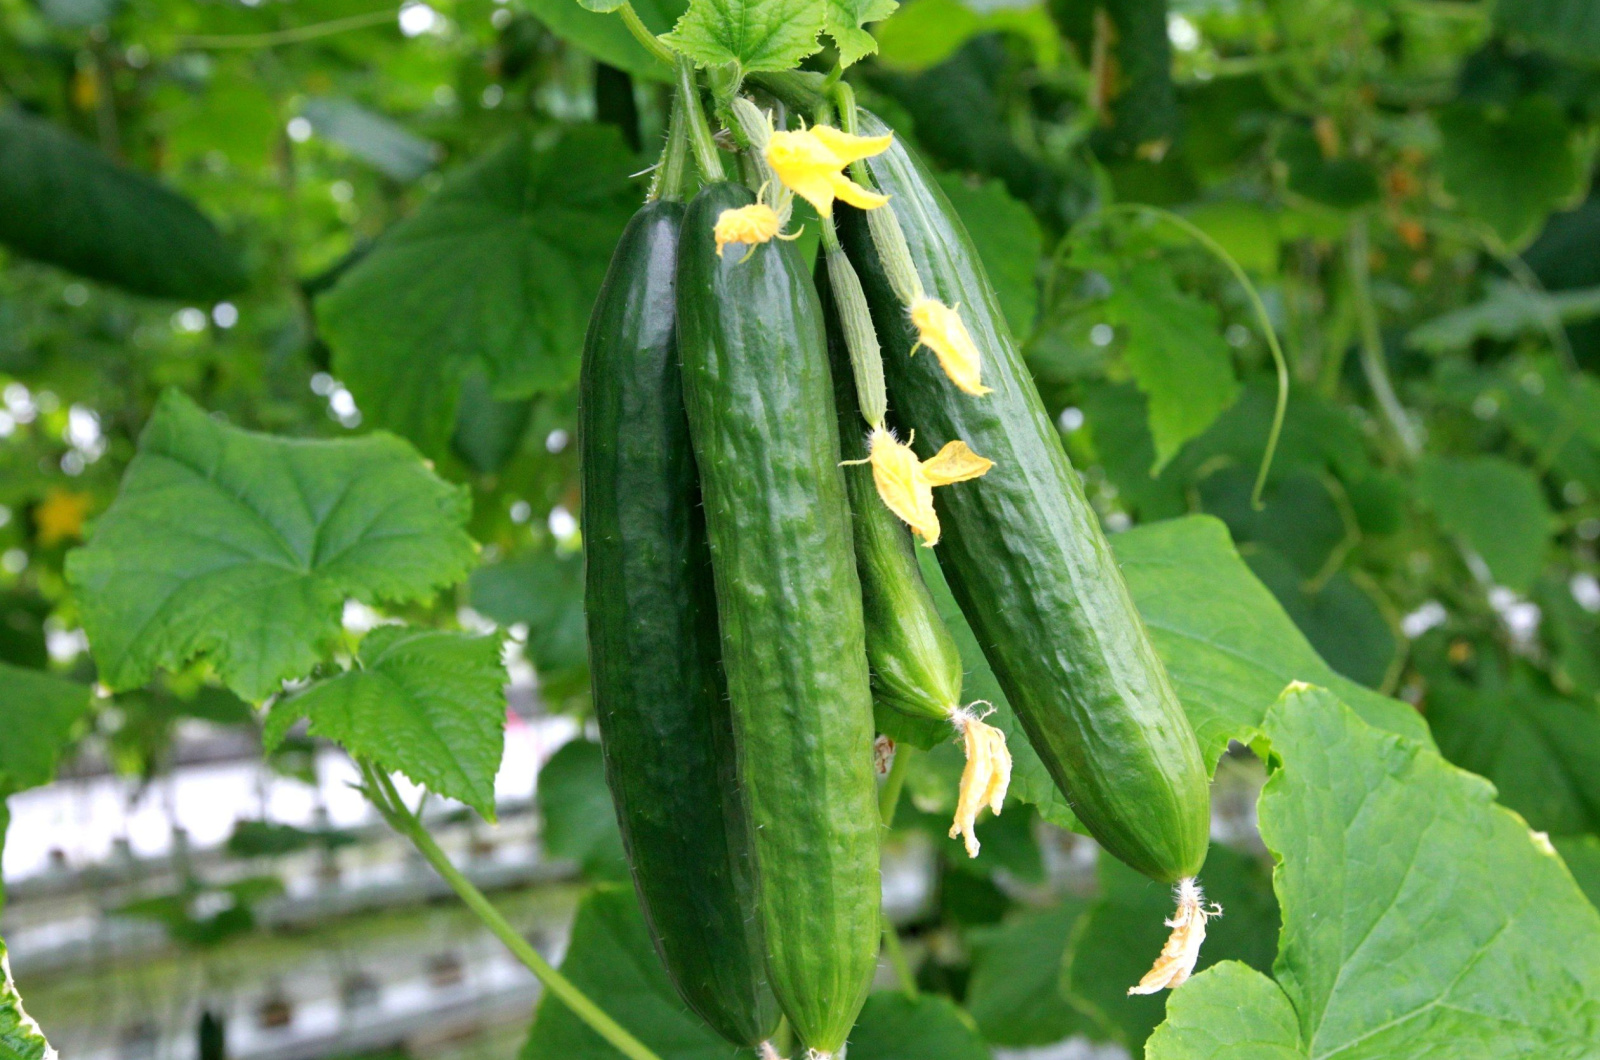 long cucumbers growing on a plant